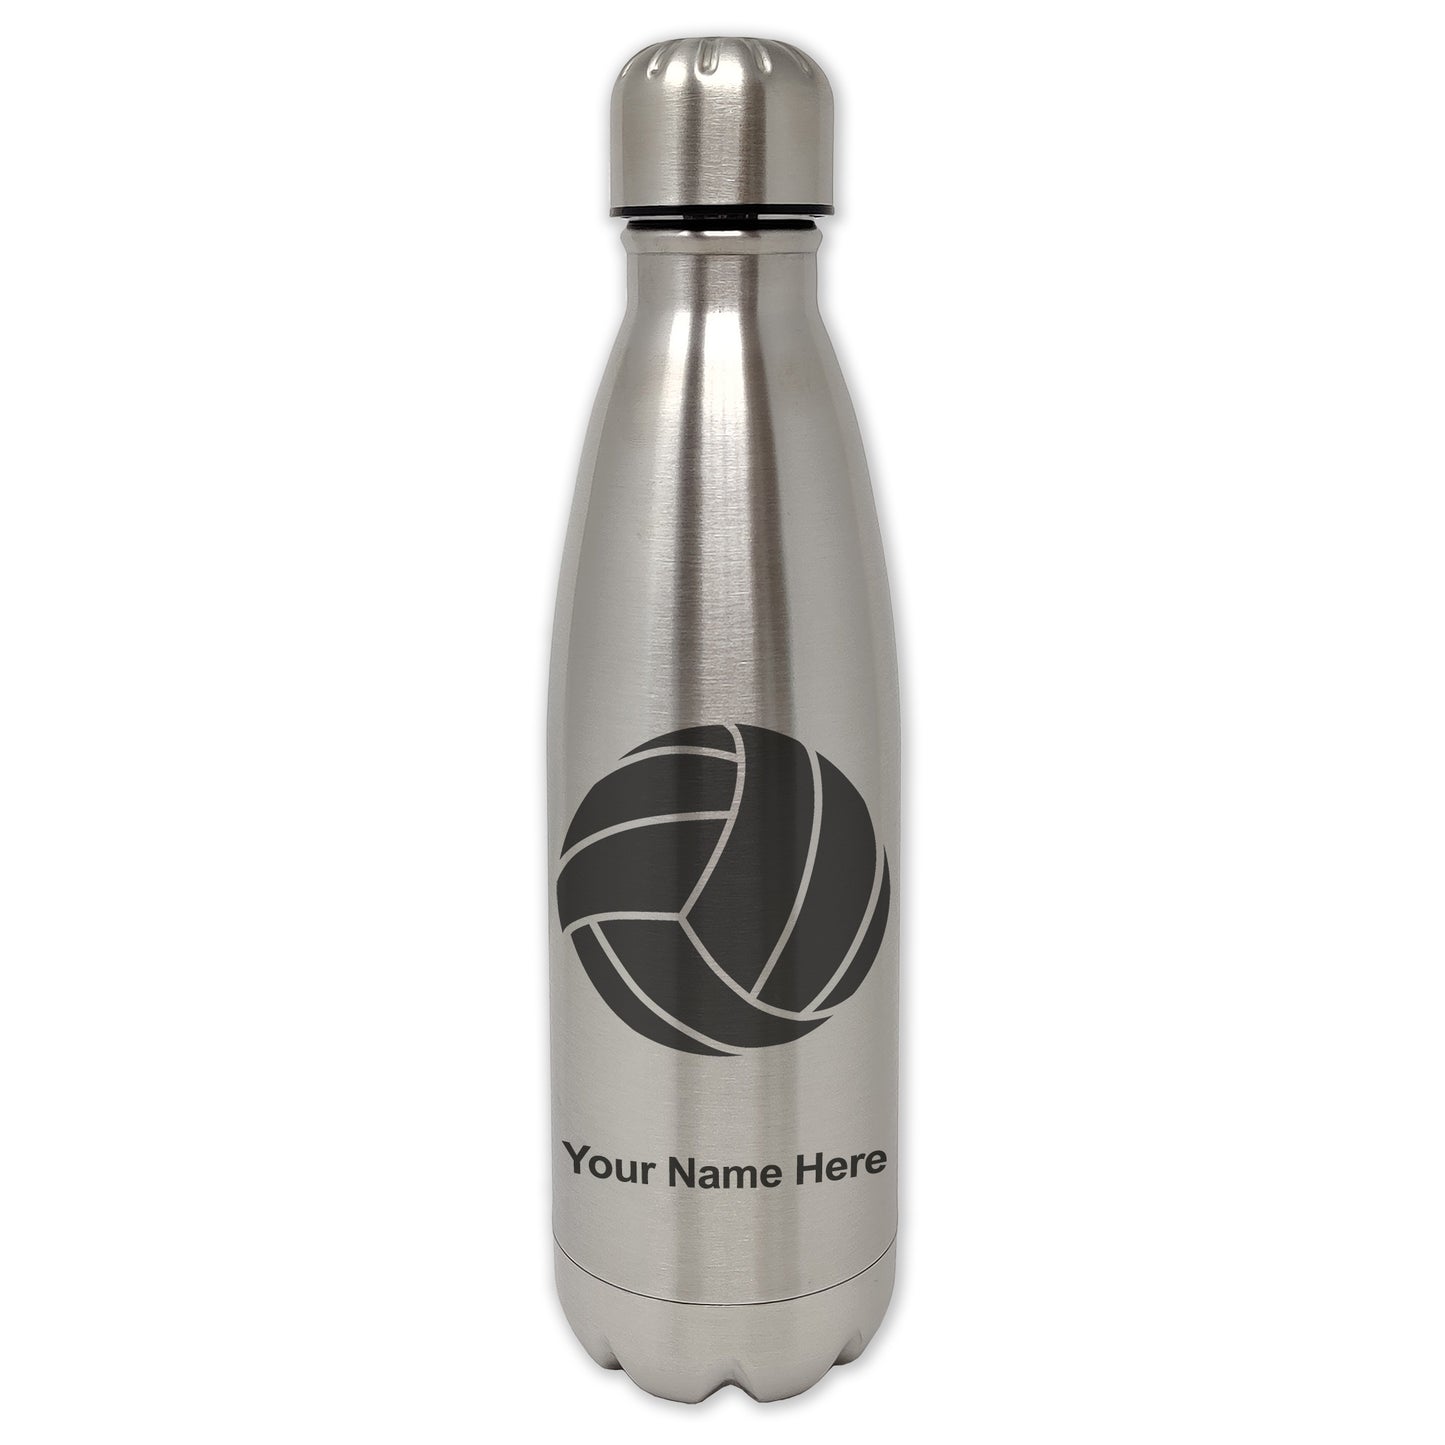 LaserGram Double Wall Water Bottle, Volleyball Ball, Personalized Engraving Included